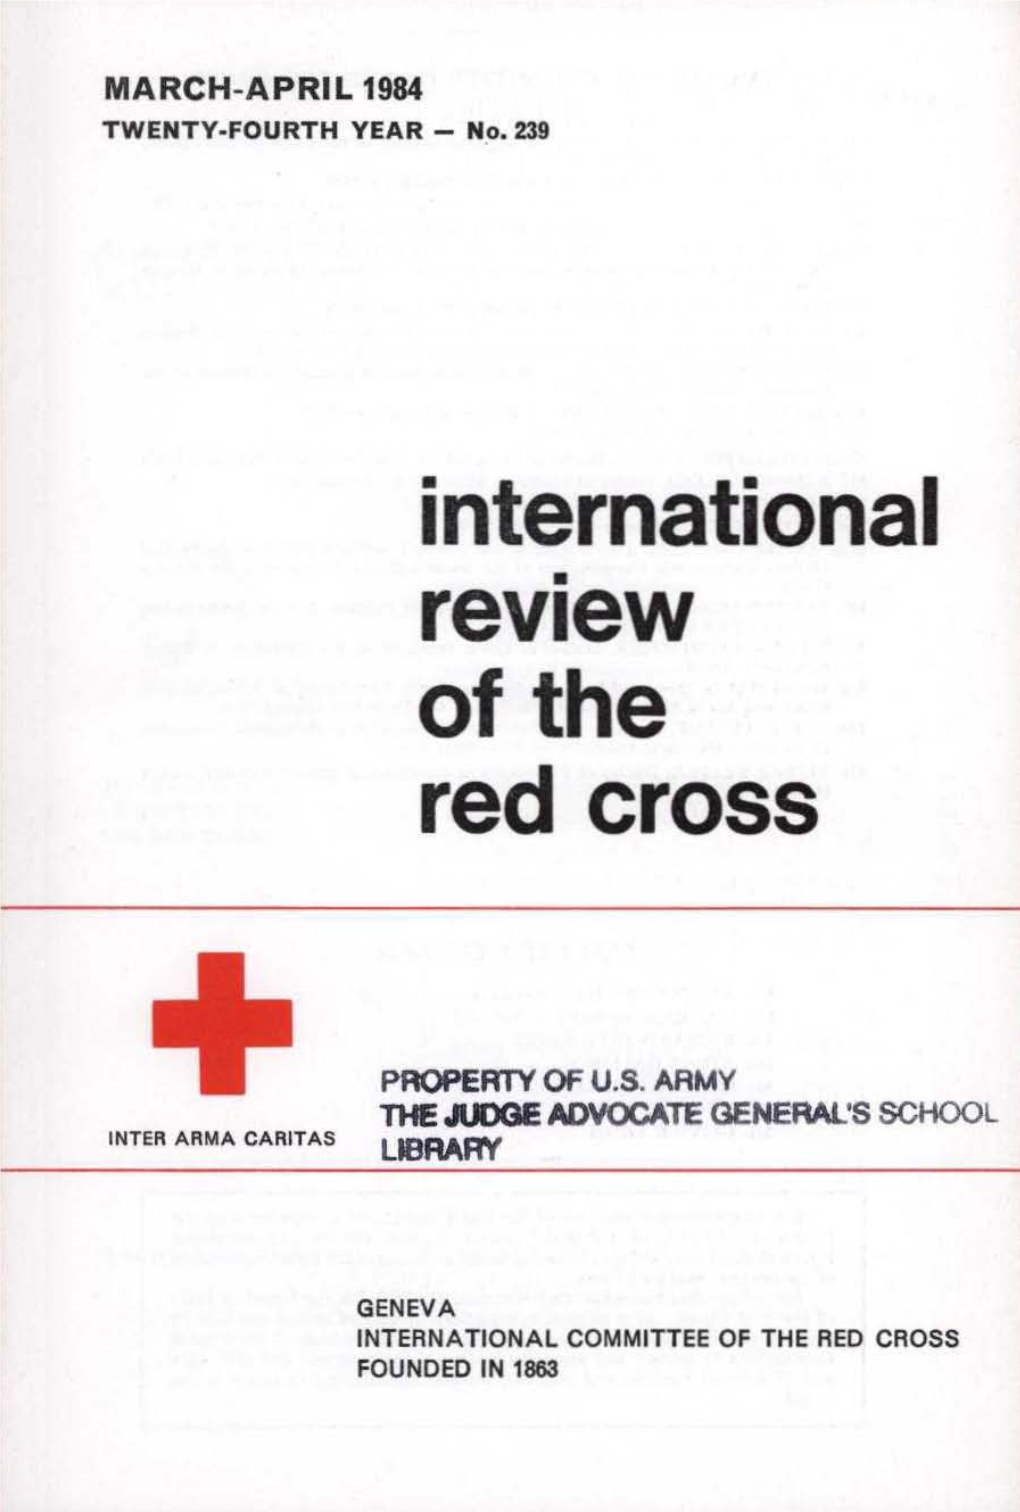 International Review of the Red Cross, March-April 1984, Twenty